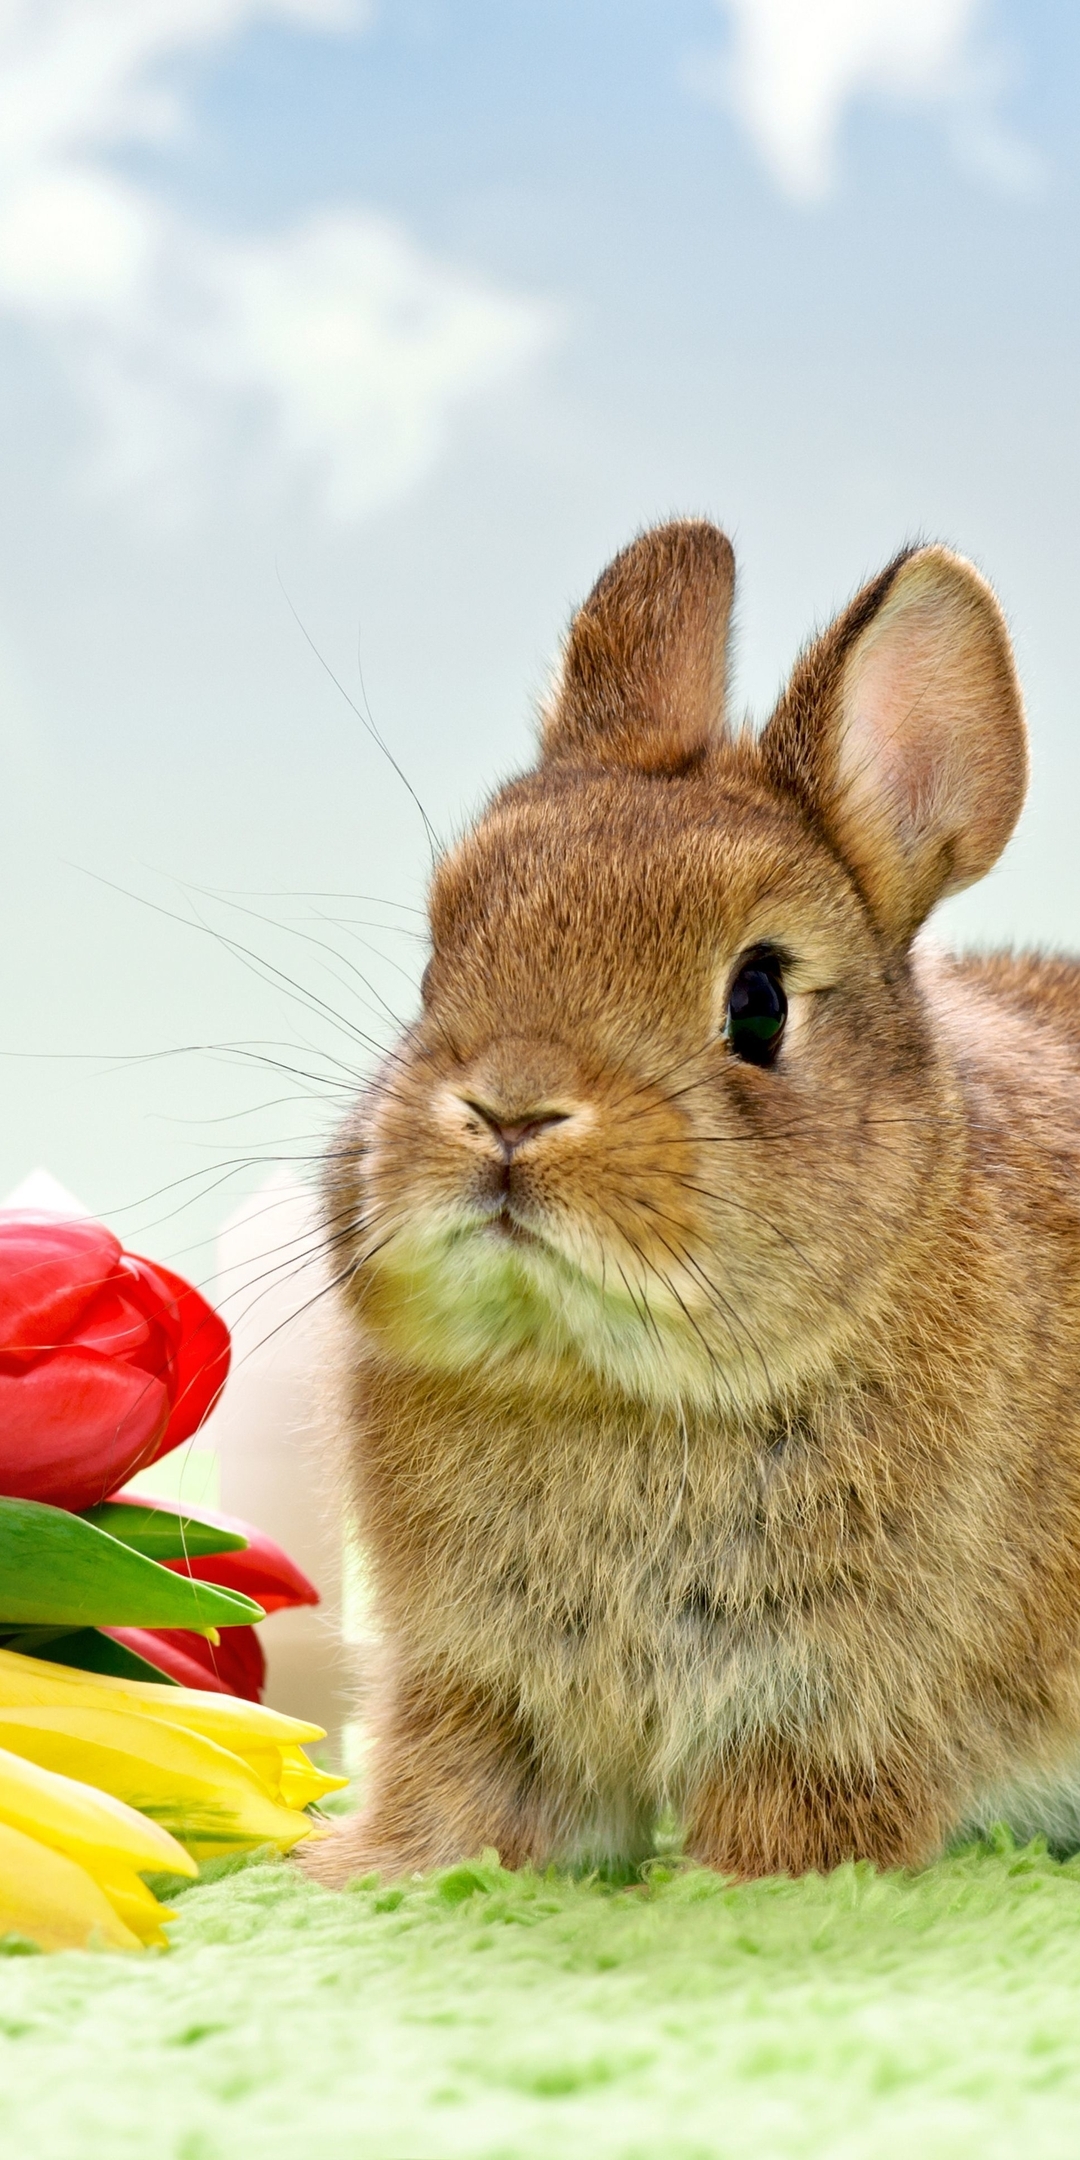 Image: Rabbit, fluffy, bouquet, tulips, flowers, spring, March 8